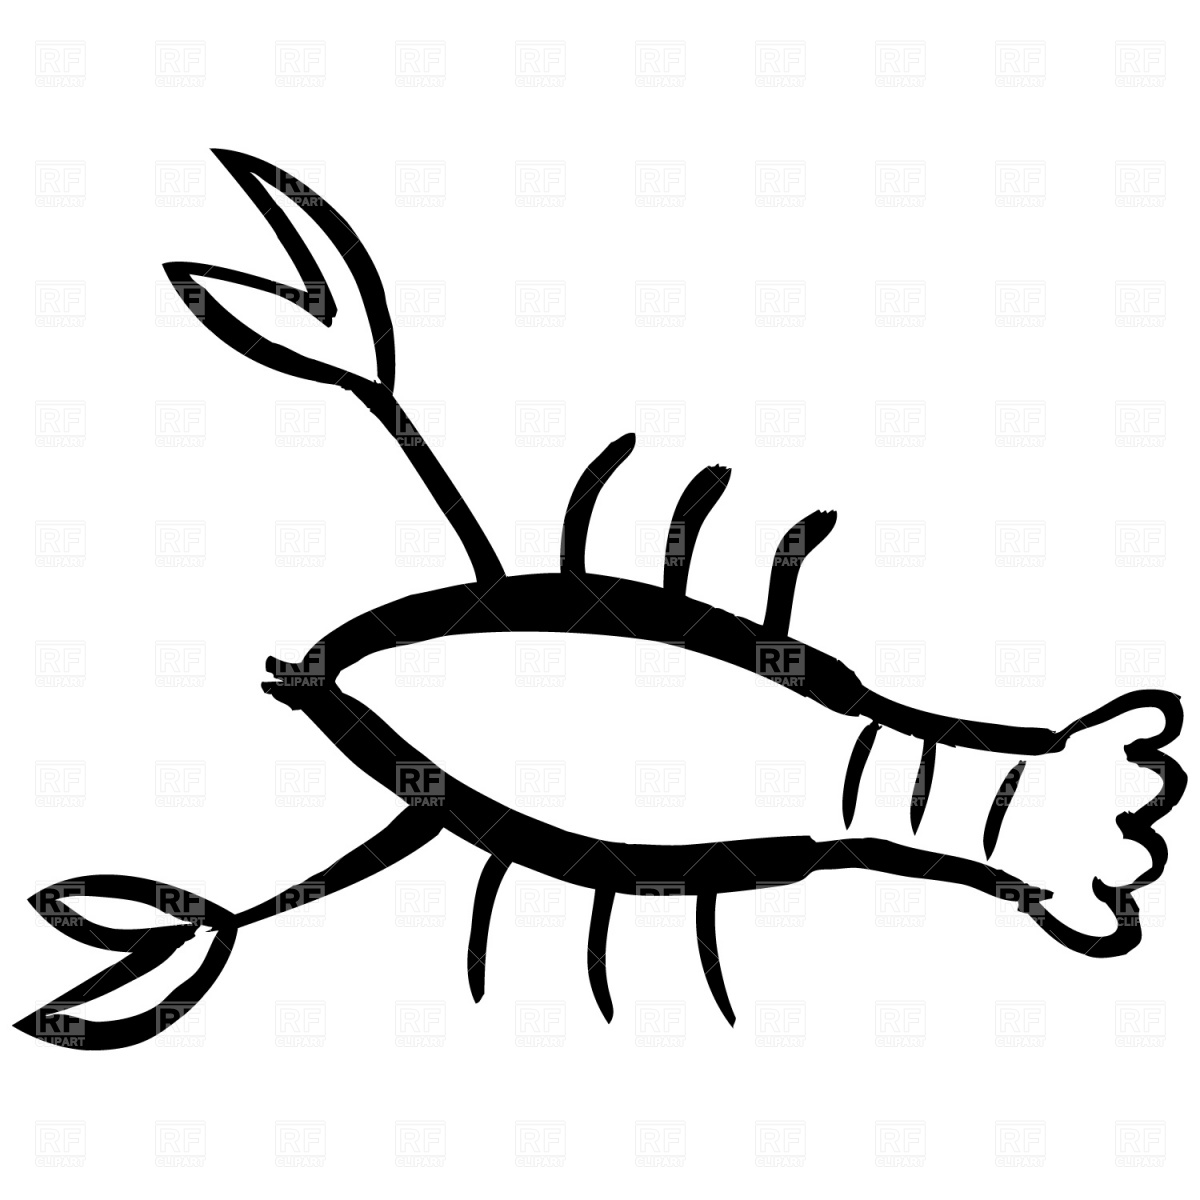 Lobster Claw Silhouette   Clipart Panda   Free Clipart Images